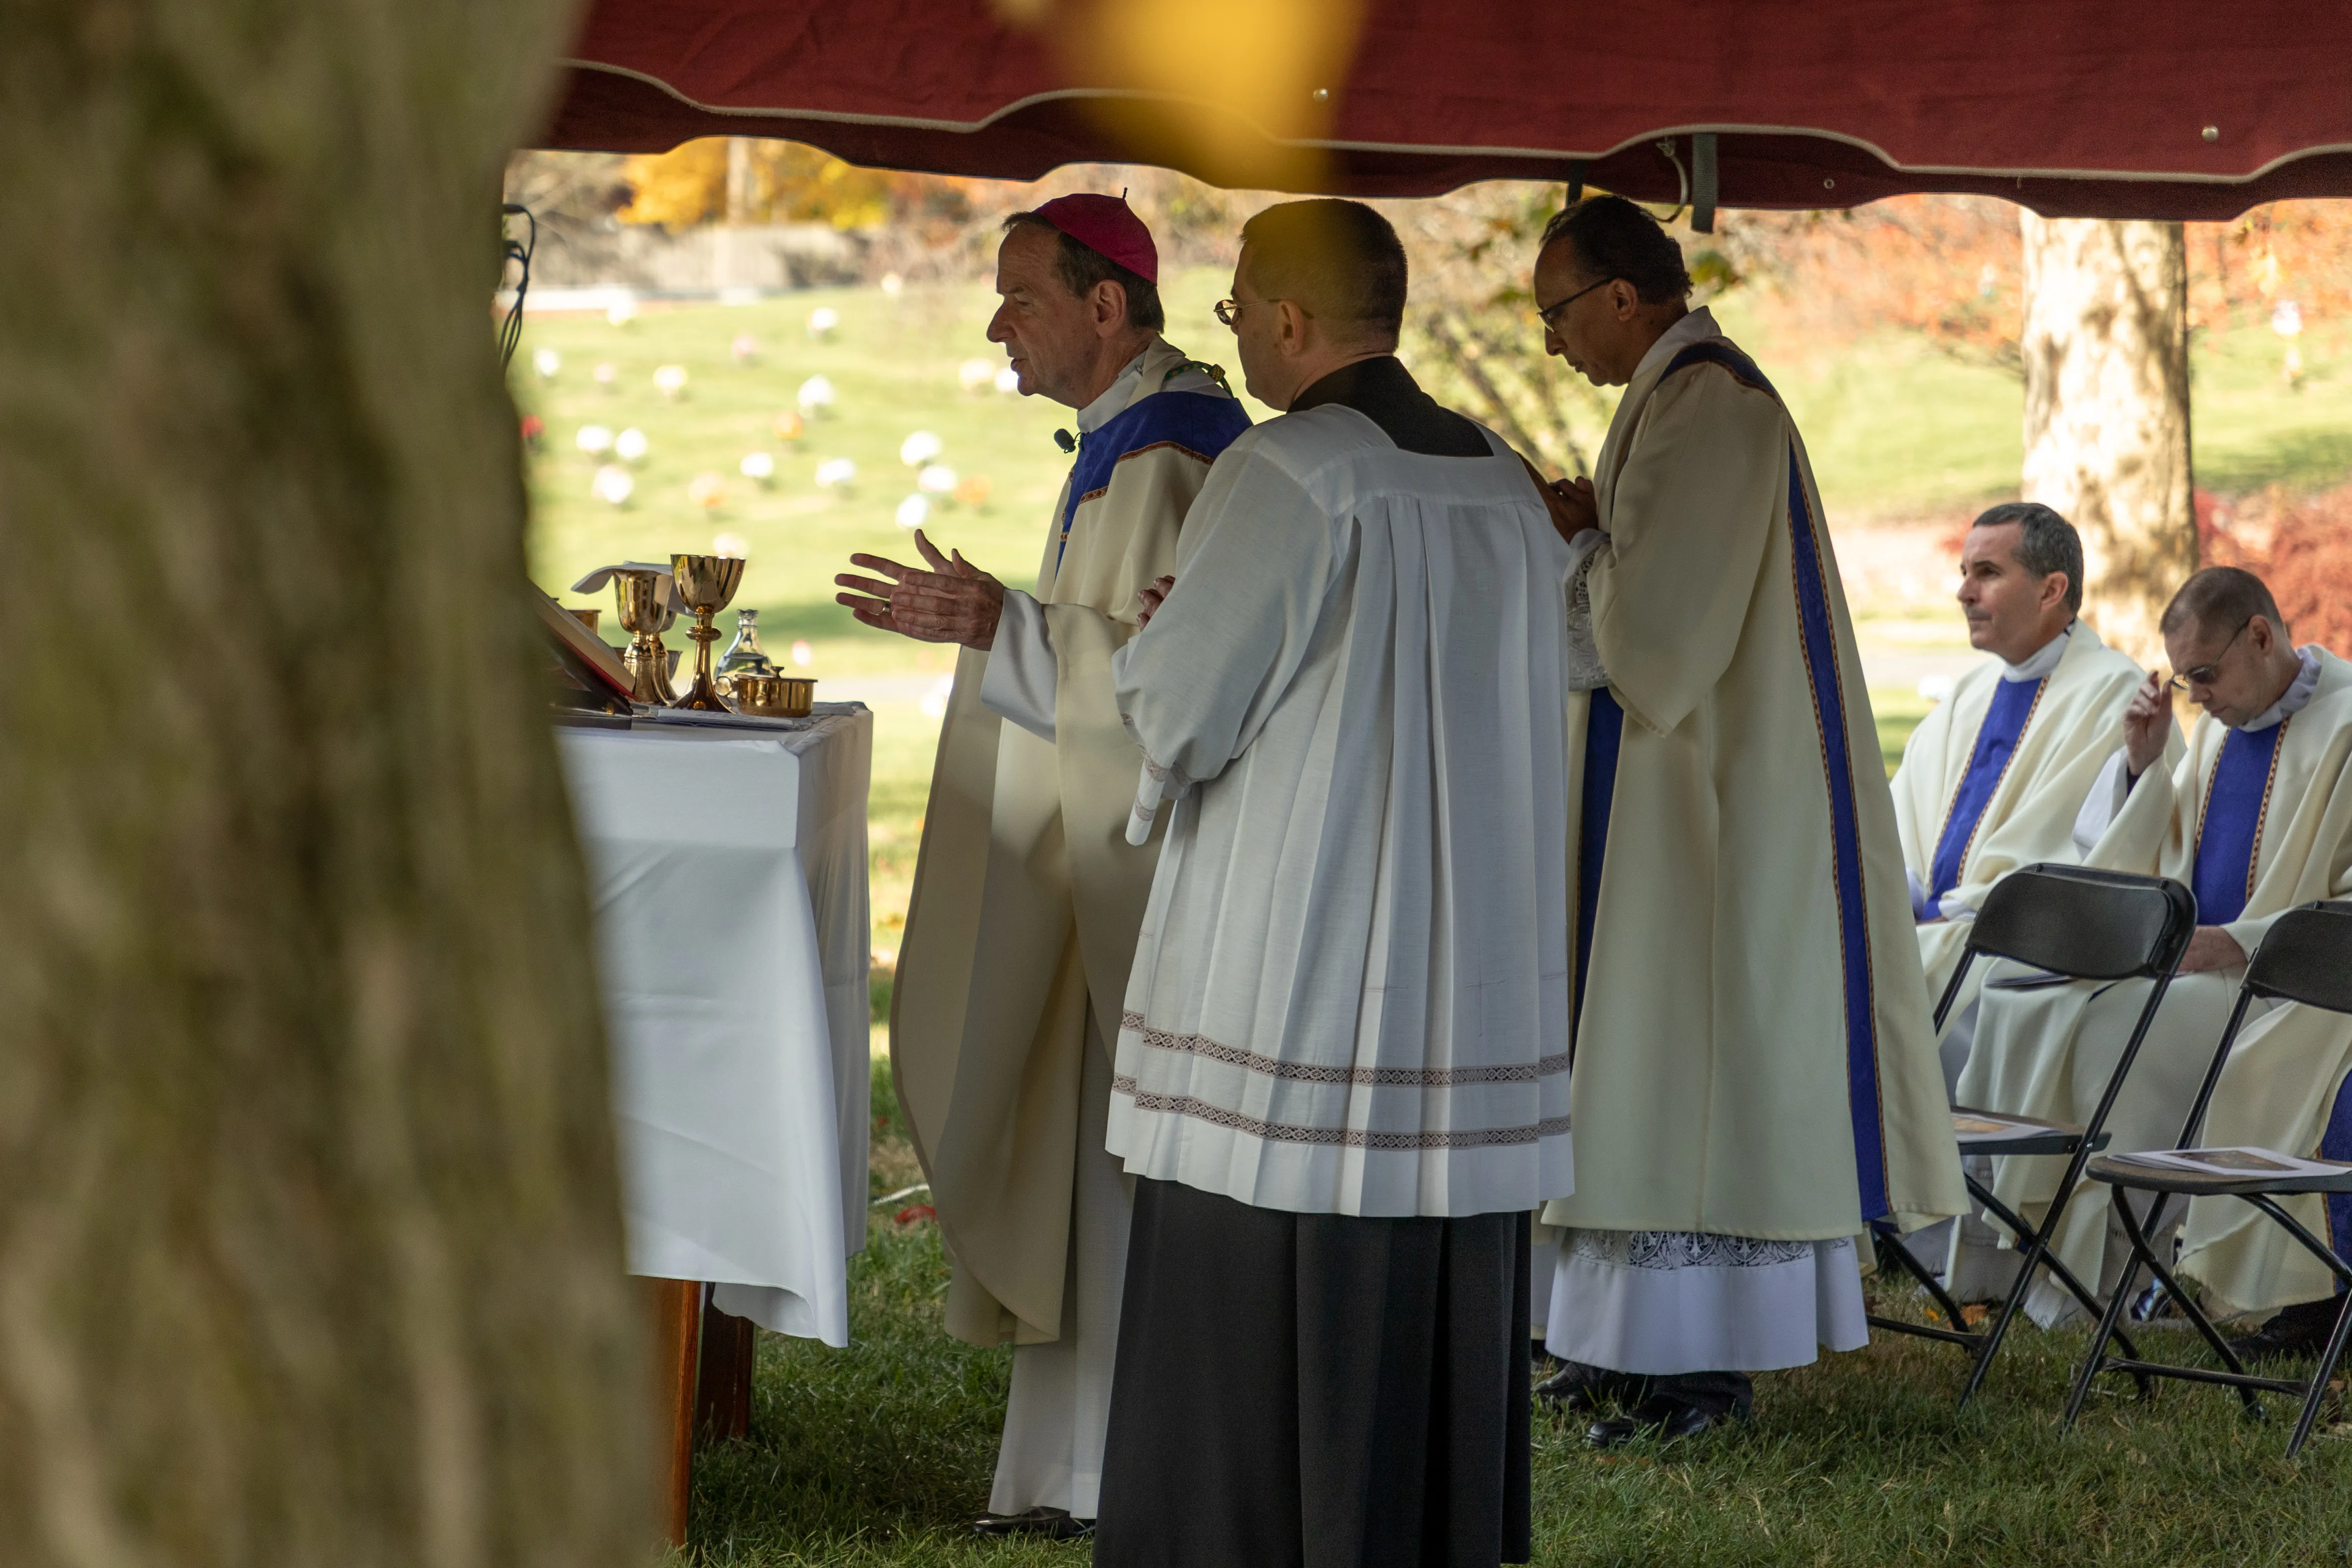 In commemoration of All Souls' Day, Arlington Bishop Michael Burbidge celebrated Mass at a Fairfax cemetery and blessed the gravesites of the priests buried there on Nov. 2, 2022.?w=200&h=150